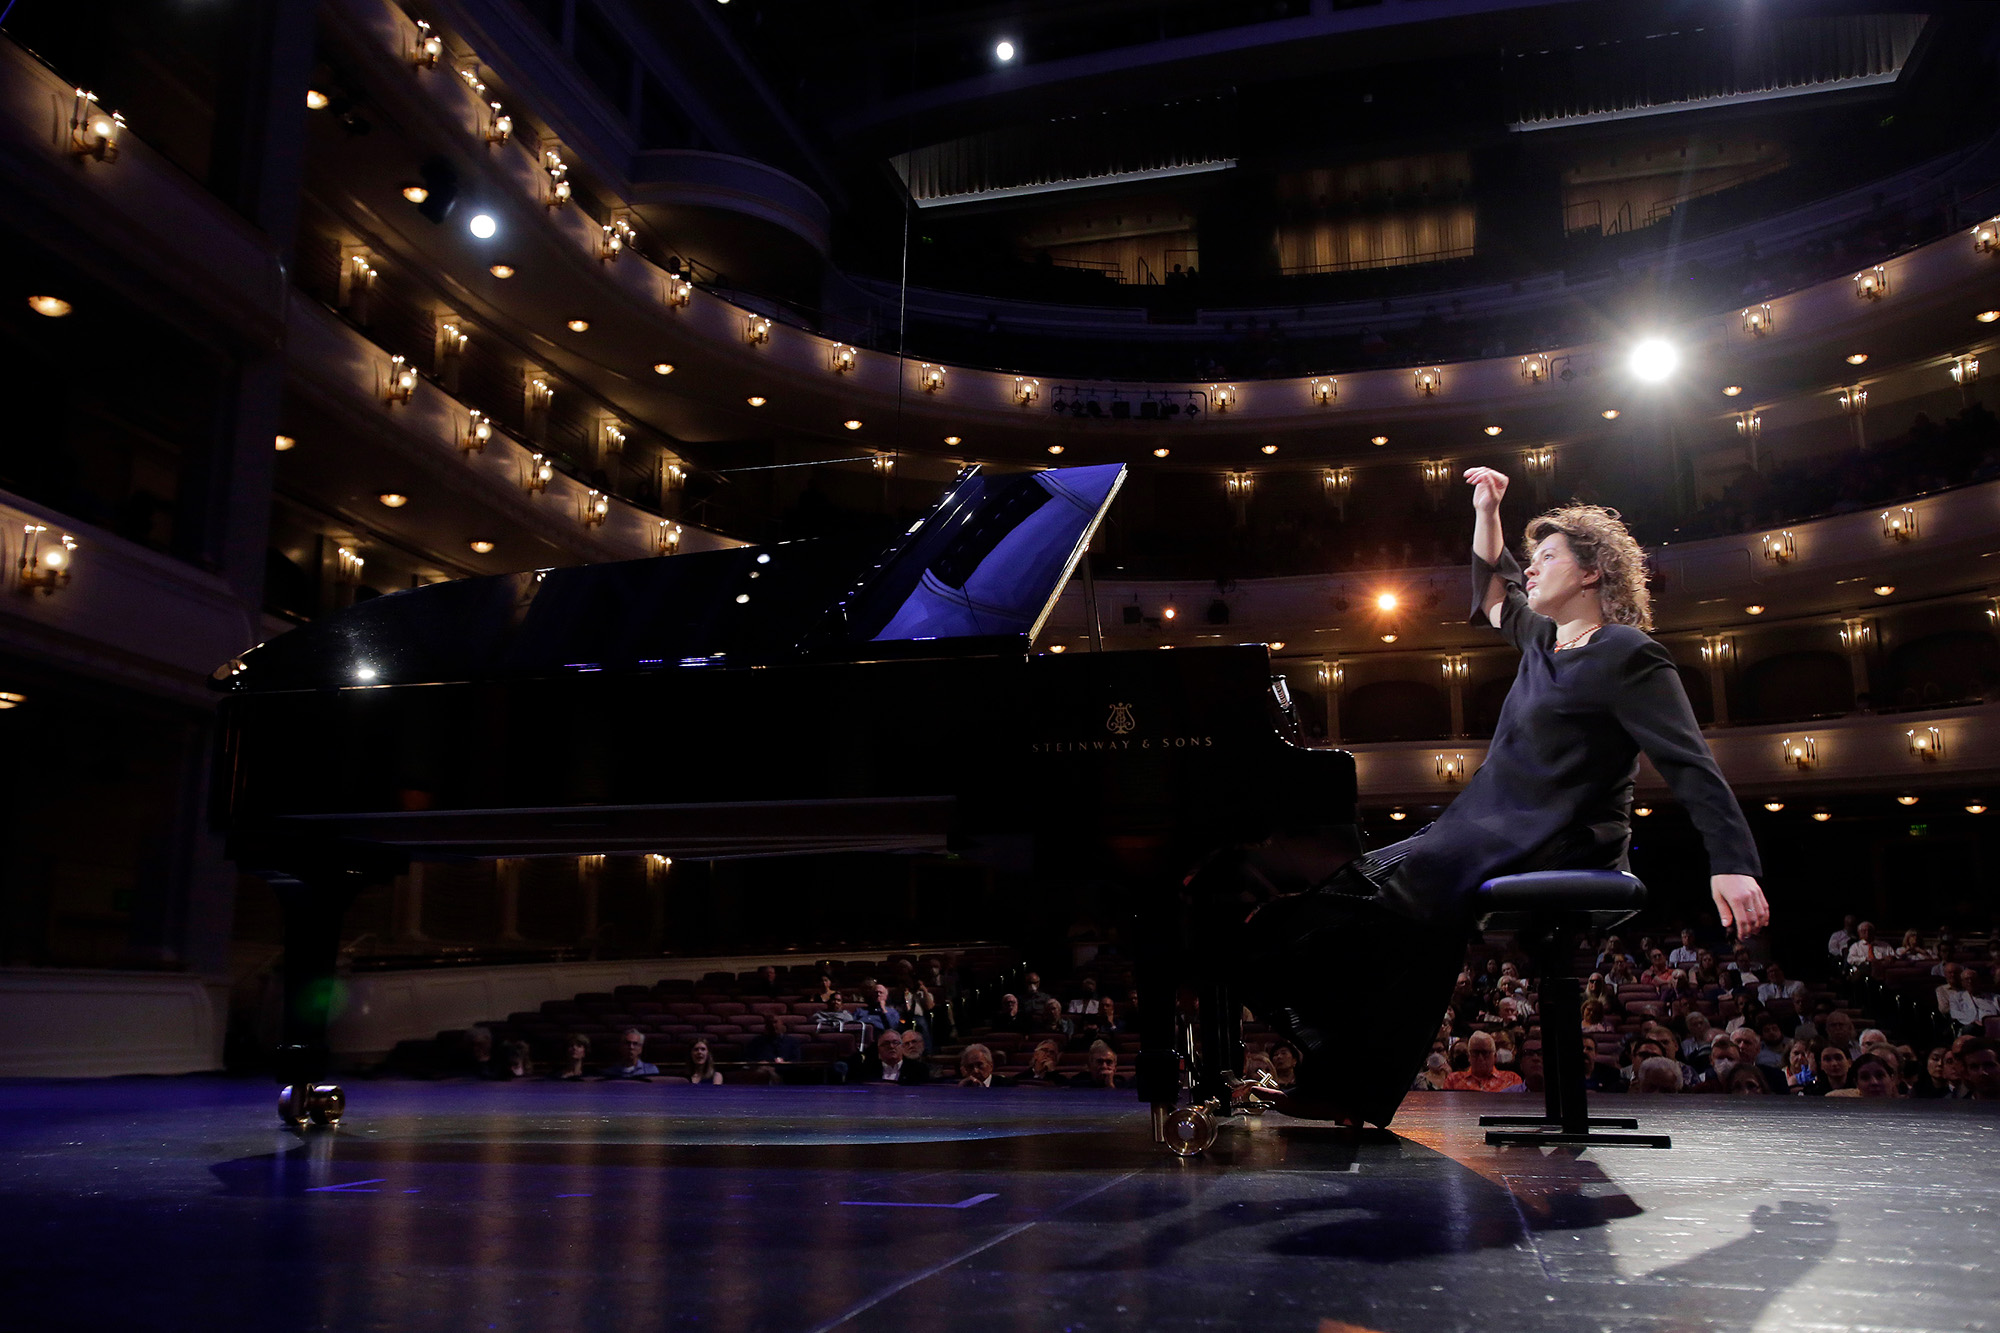 Anna Geniushene seated at the piano in a crowded concert hall, swaying back with a look of focus: one hand swings behind her and the other swings above her head